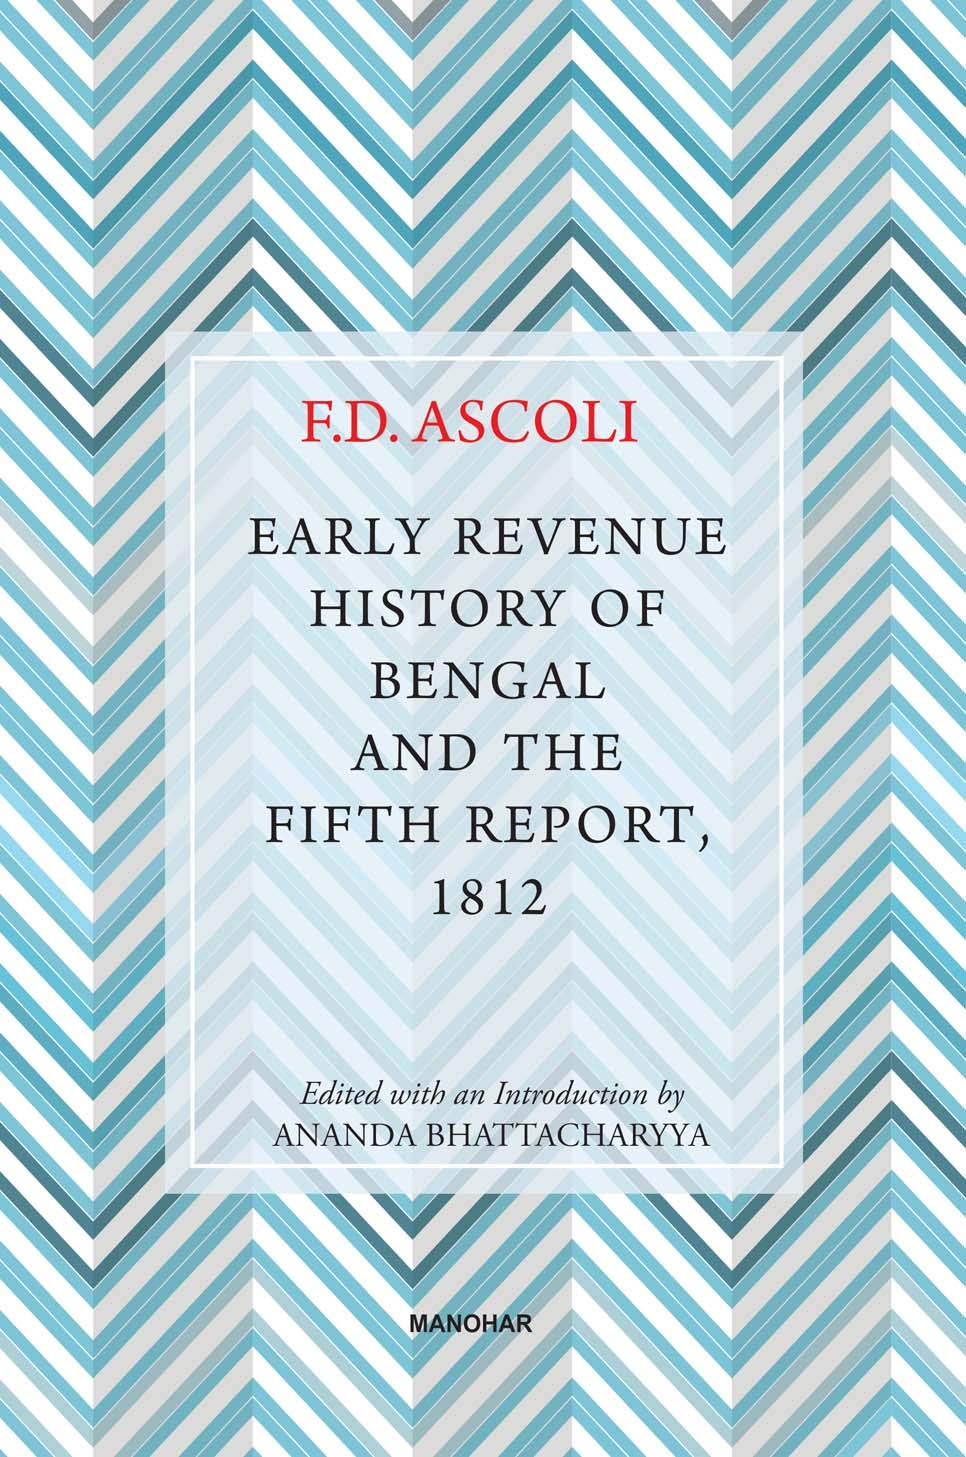 Early Revenue History of Bengal and The Fifth Report, 1812